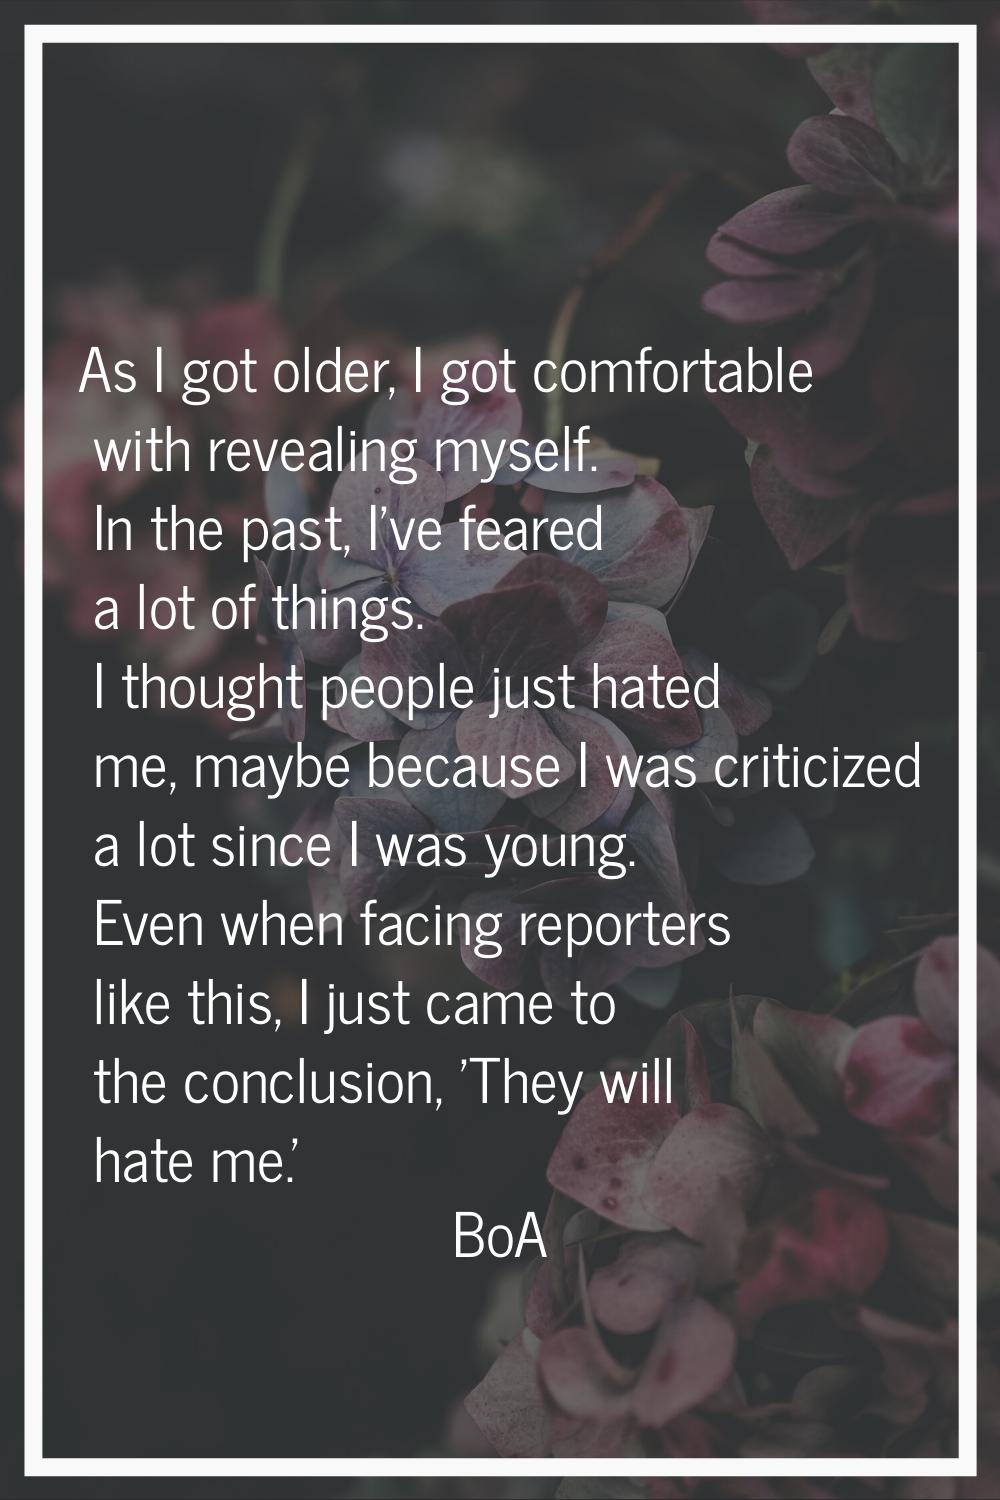 As I got older, I got comfortable with revealing myself. In the past, I've feared a lot of things. 